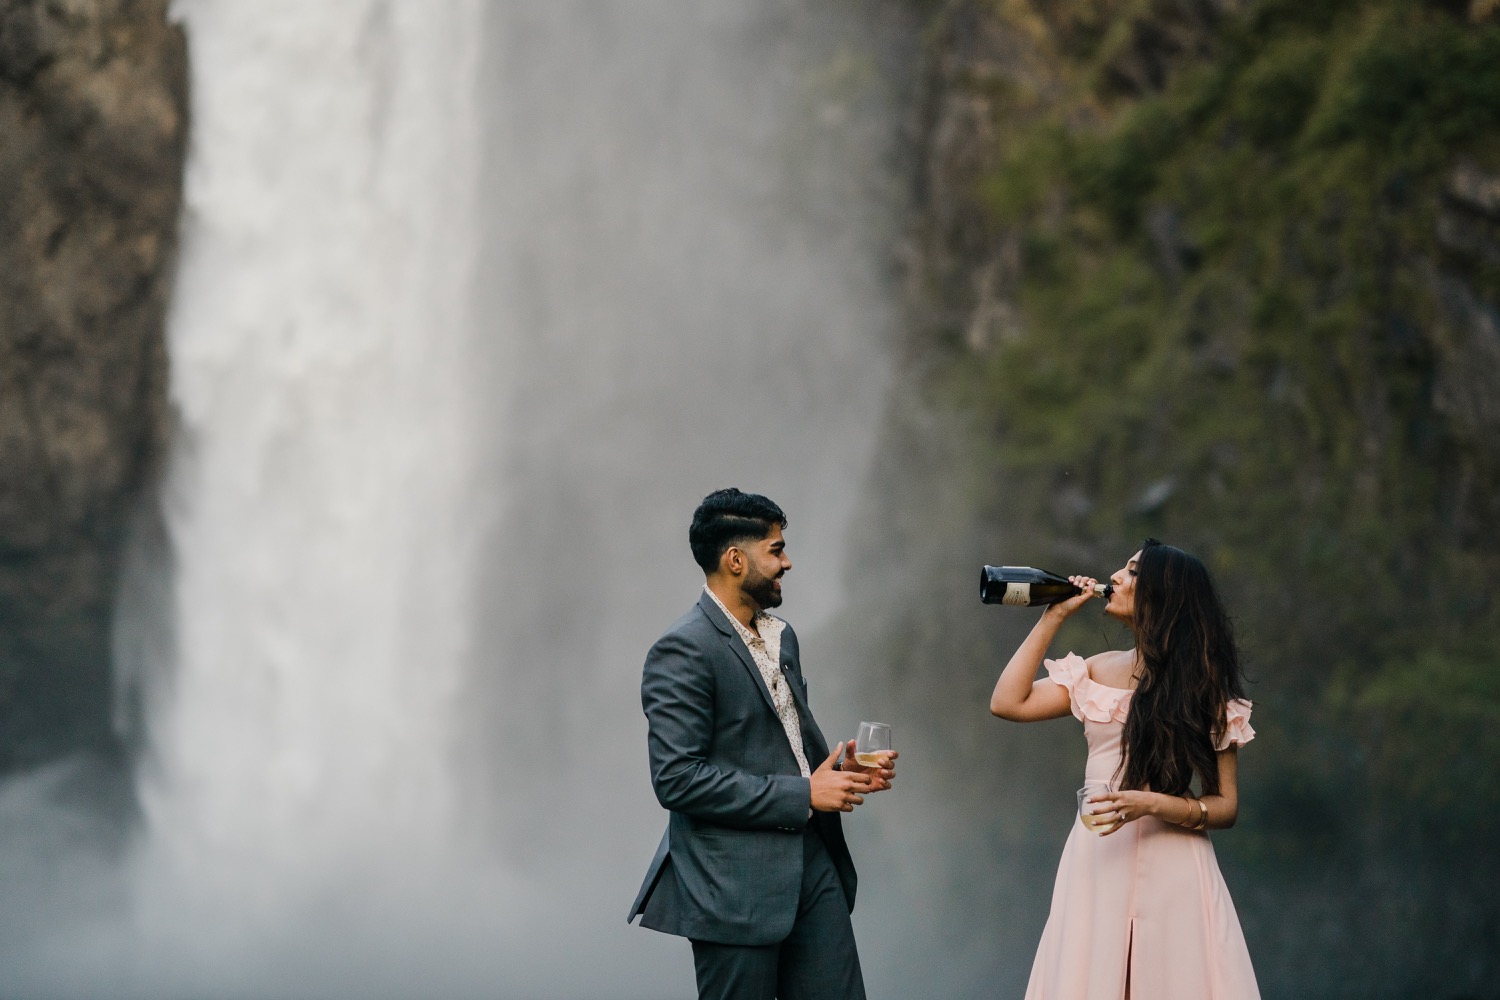 Woman drinks from the champagne bottle at Snoqualmie Falls